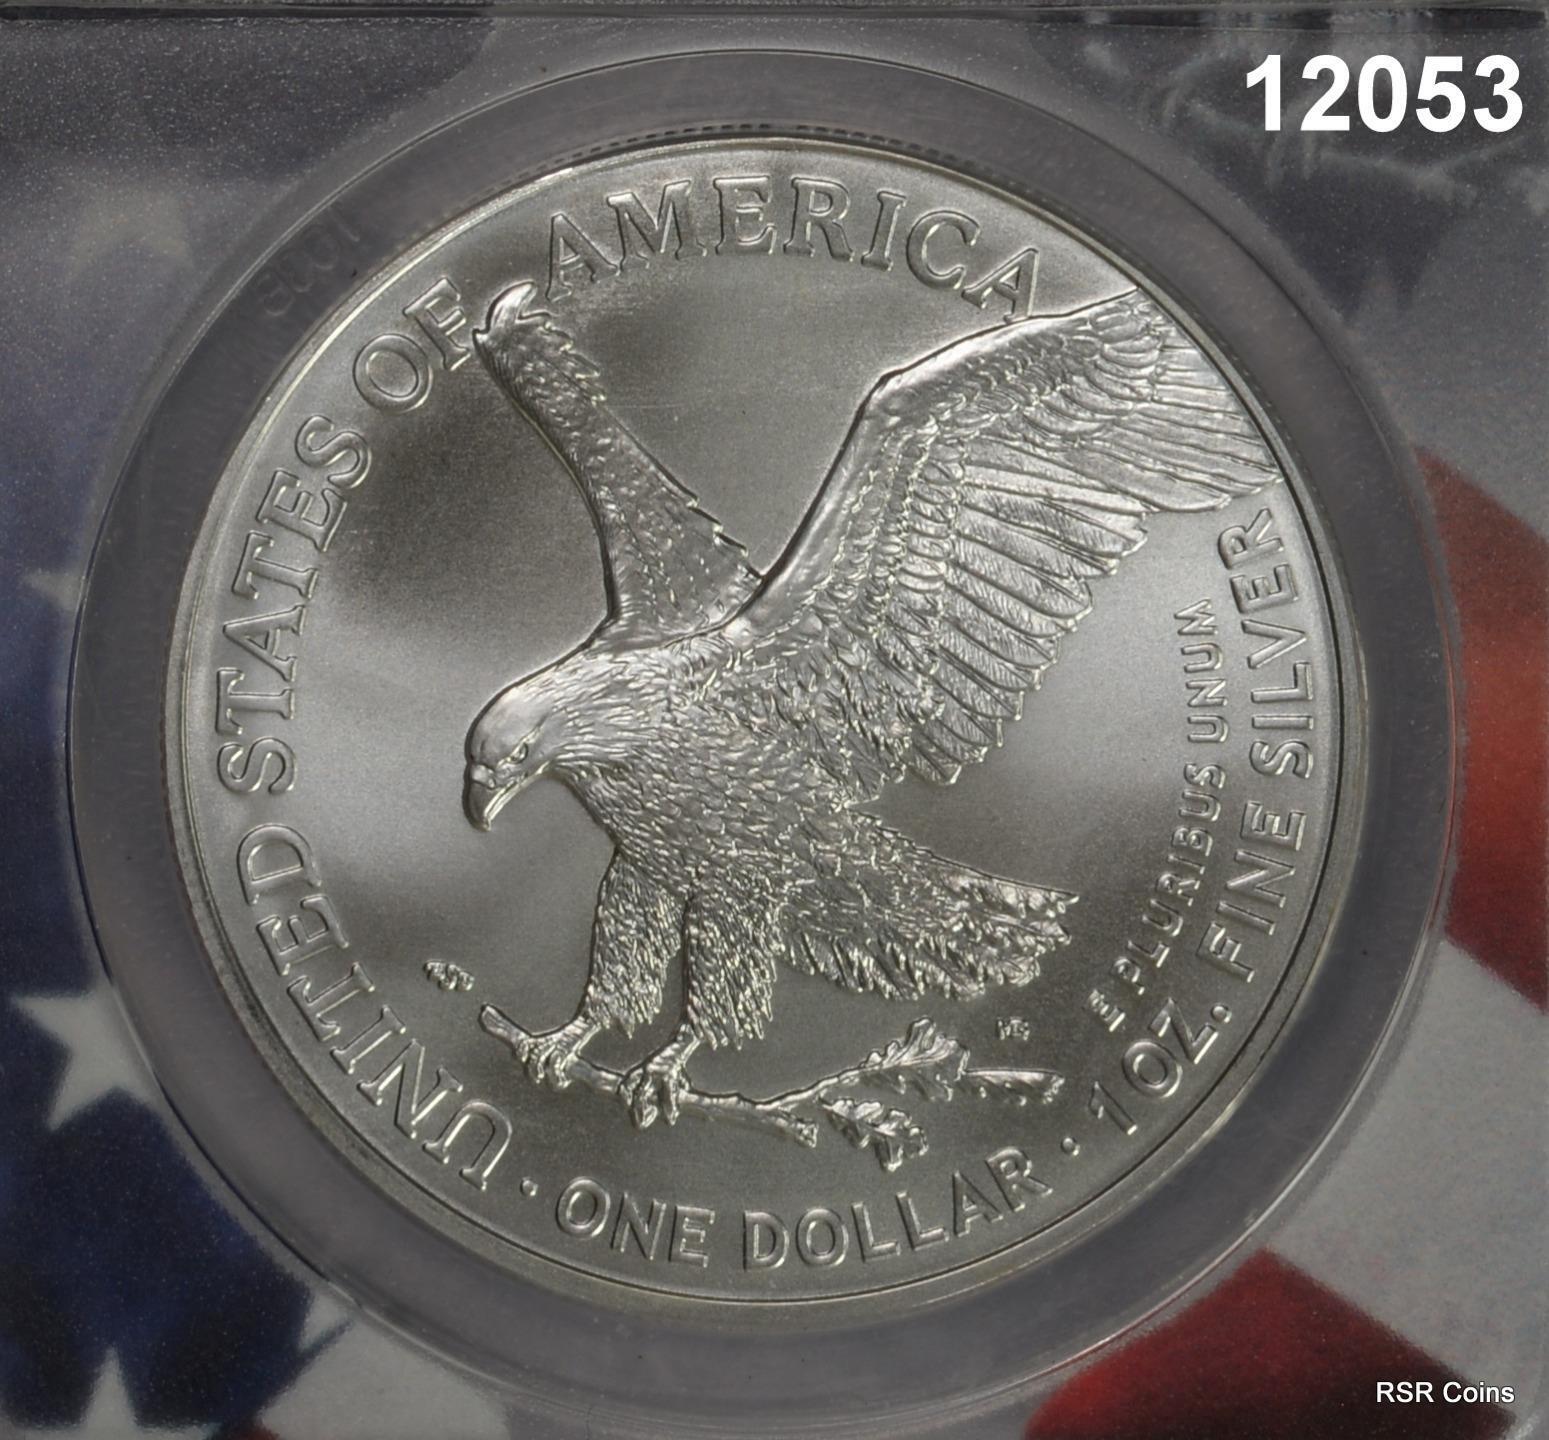 2021 SILVER EAGLE  TYPE 2 1ST STRIKE ANACS CERTIFIED MS70!#12053